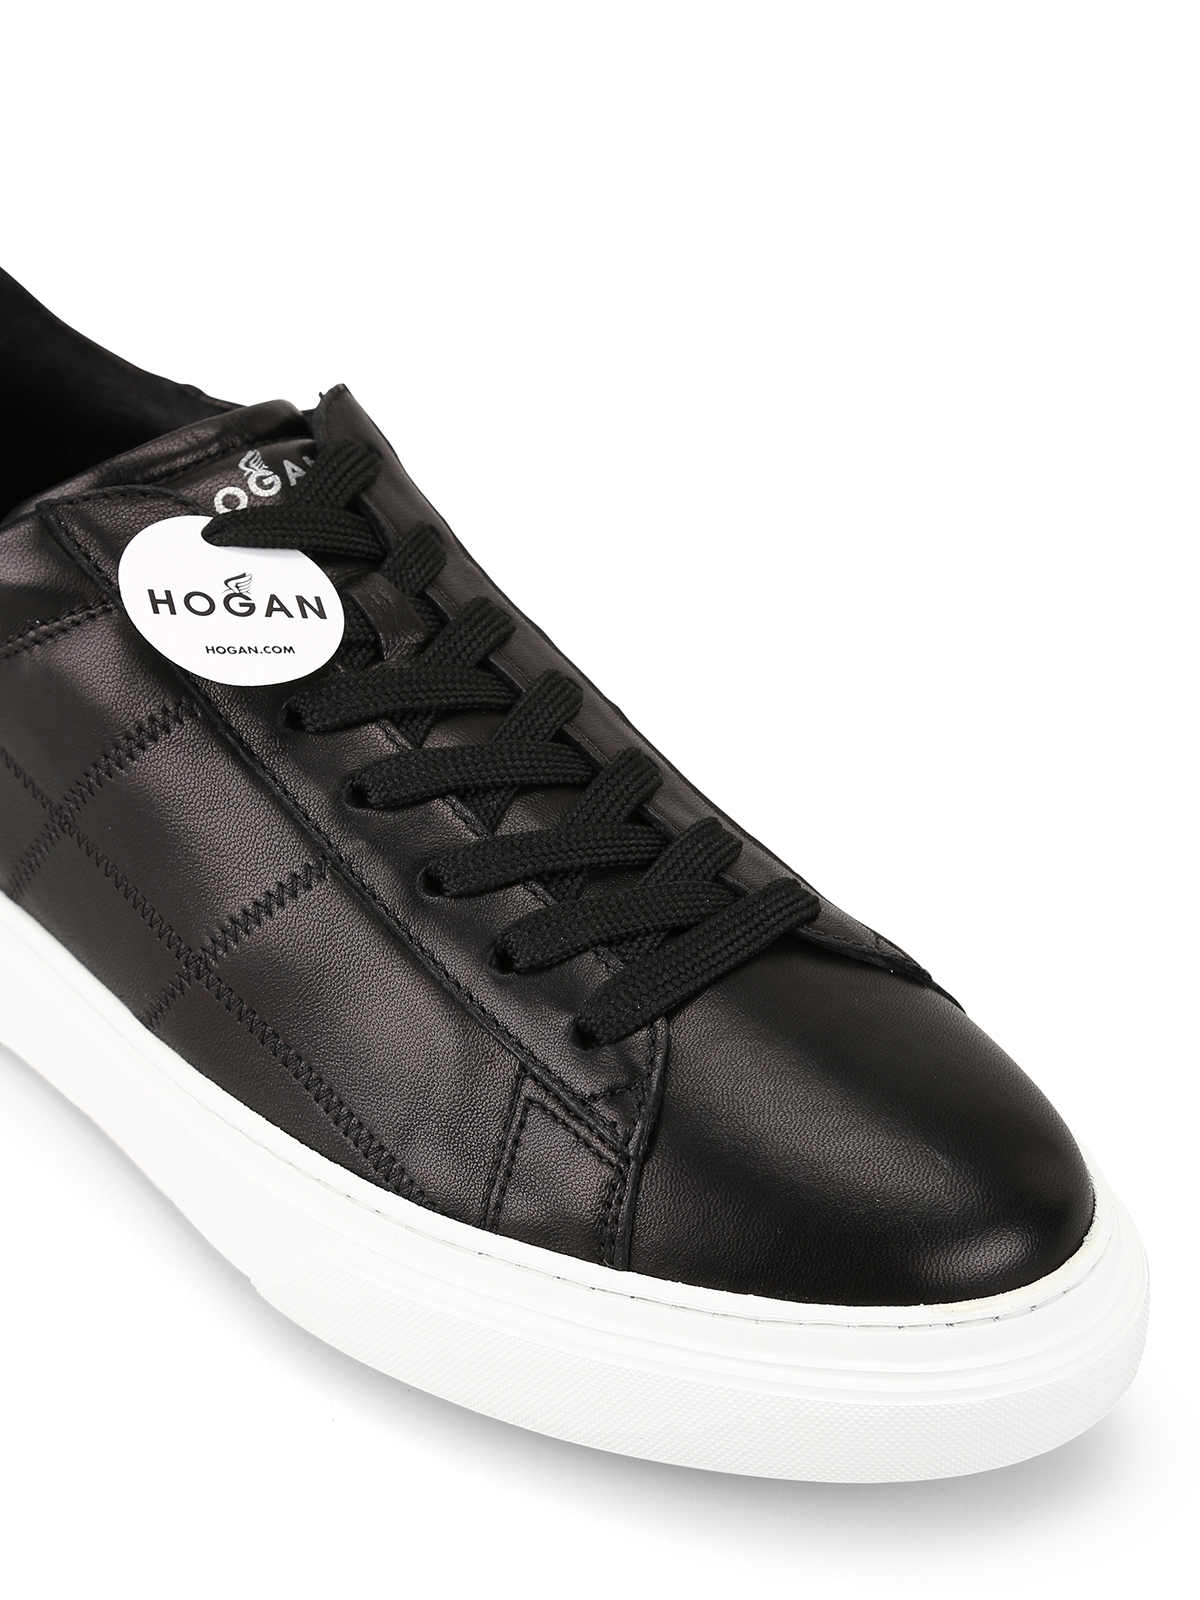 black leather low top sneakers